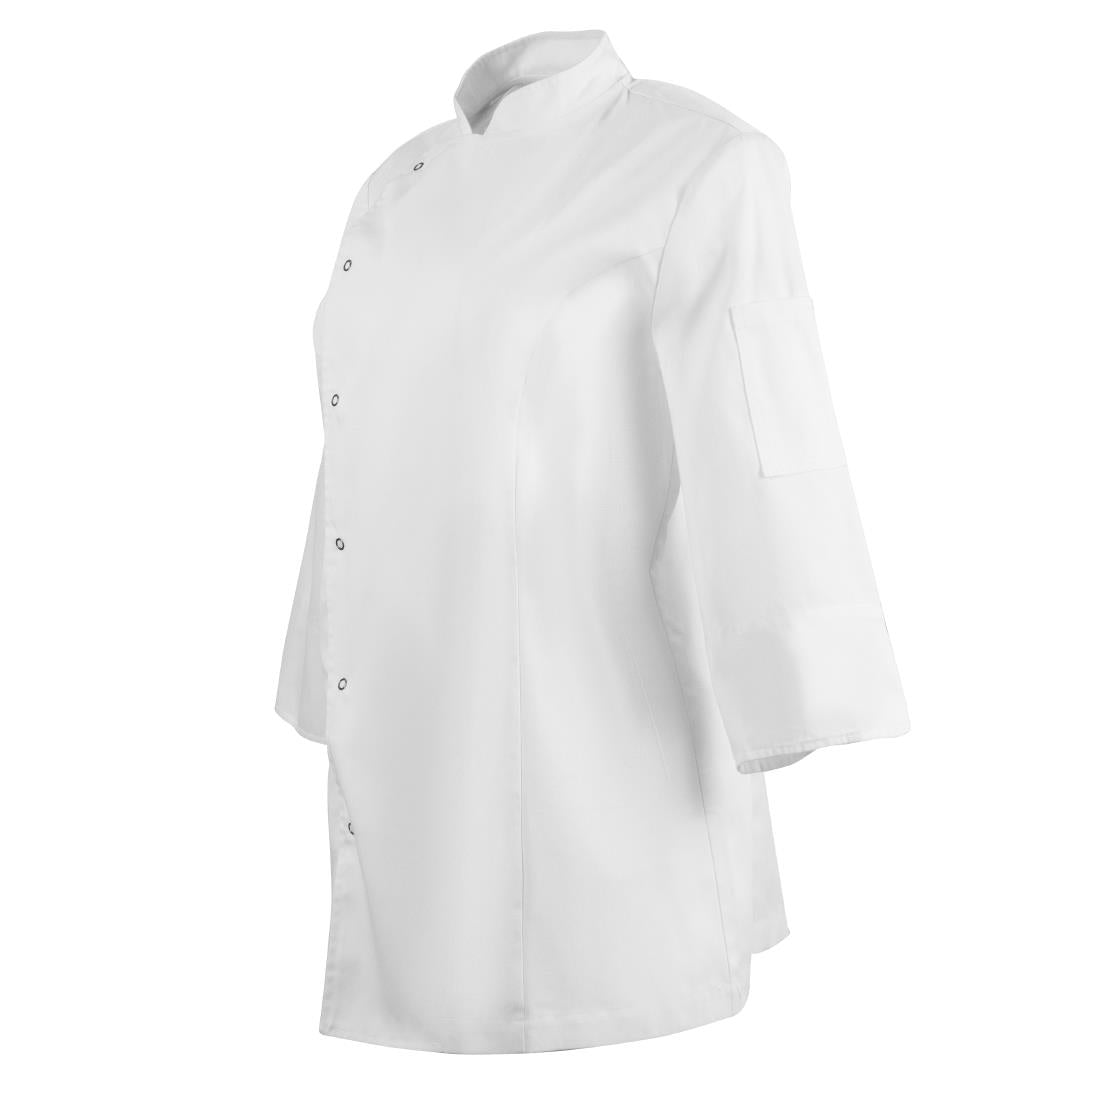 BB701-S Whites Ladies Fitted Jacket - Size S JD Catering Equipment Solutions Ltd